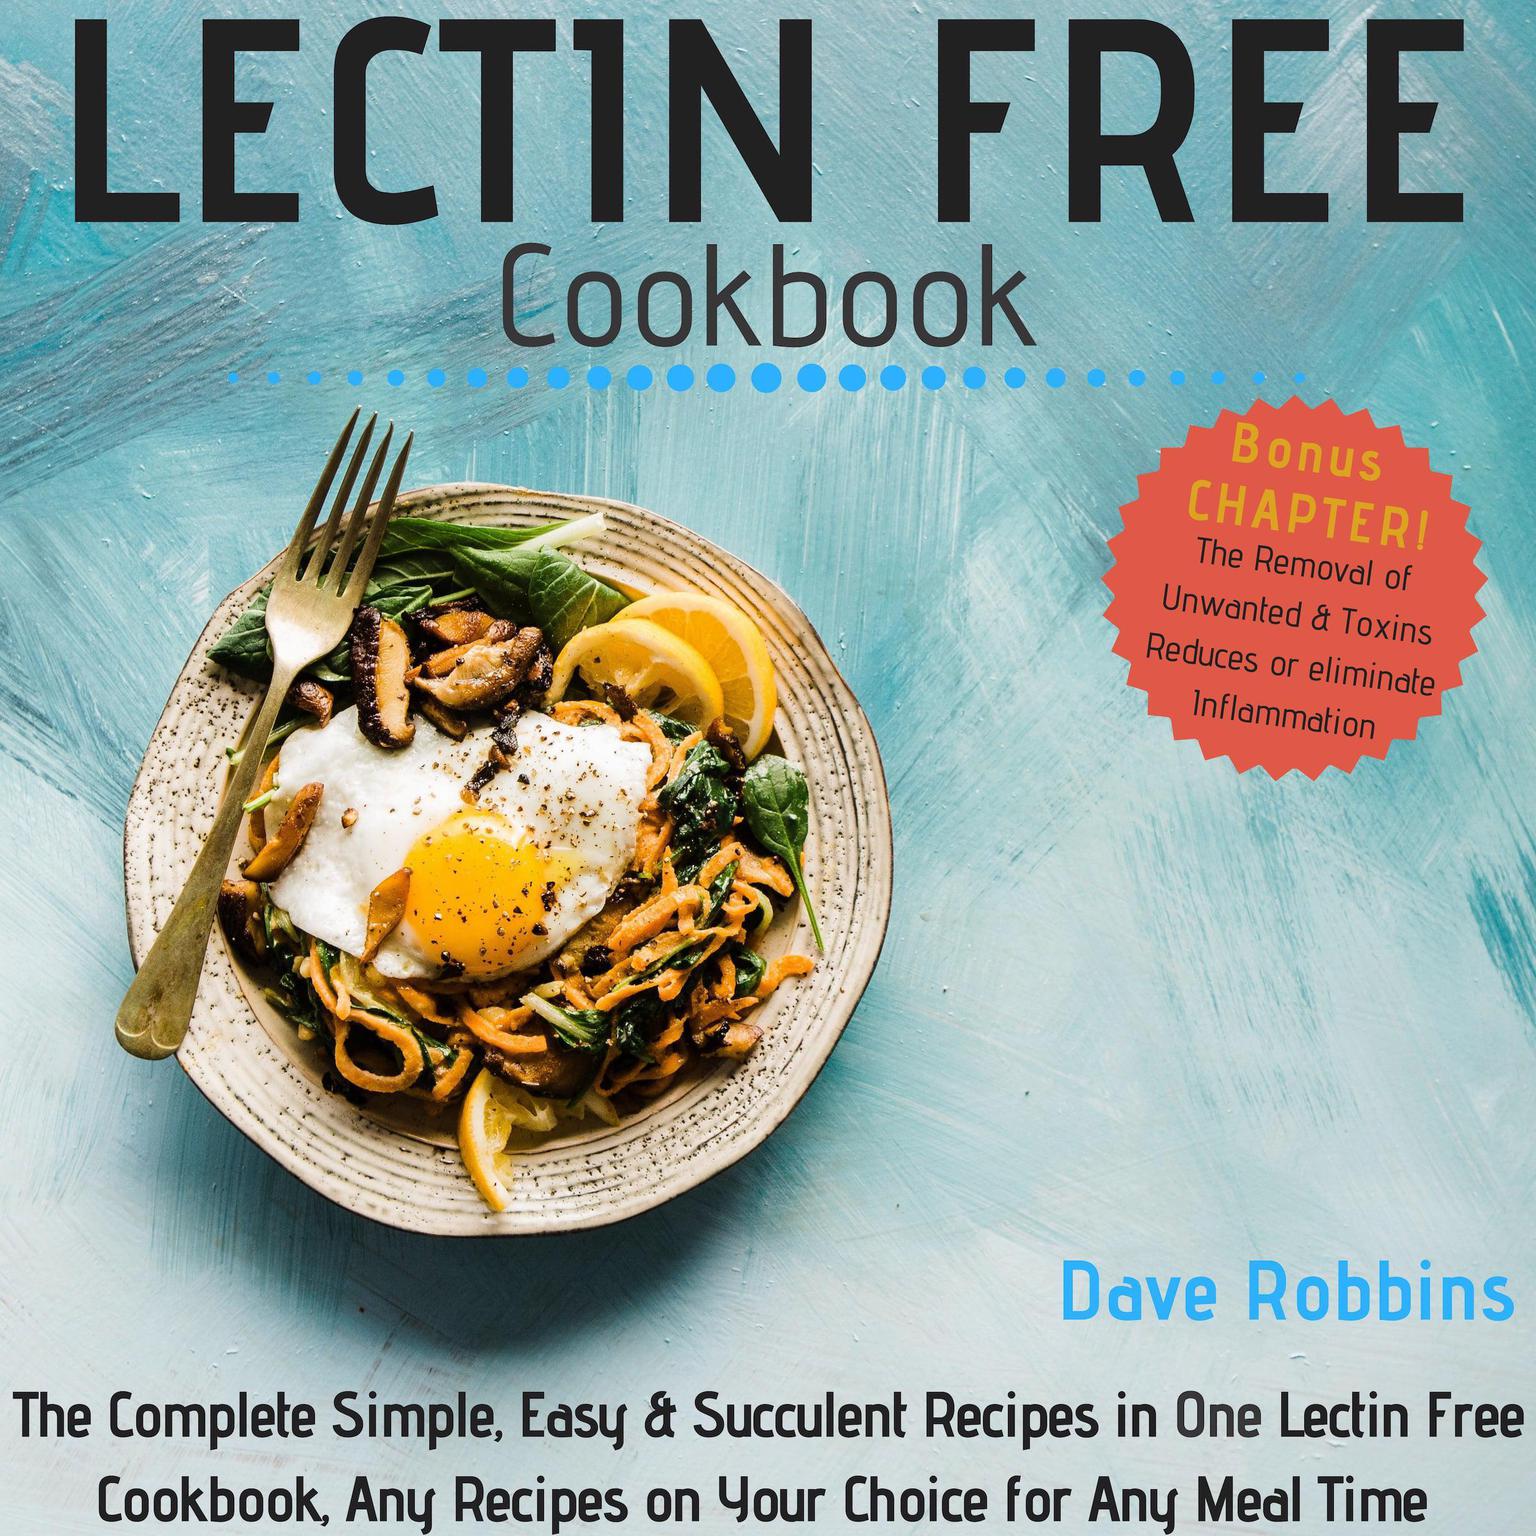 Lectin Free Cookbook: The Complete Simple, Easy & Succulent Recipes in One Lectin Free Cookbook, Any Recipes on Your Choice for Any Meal Time (2nd Edition) Audiobook, by Dave Robbins